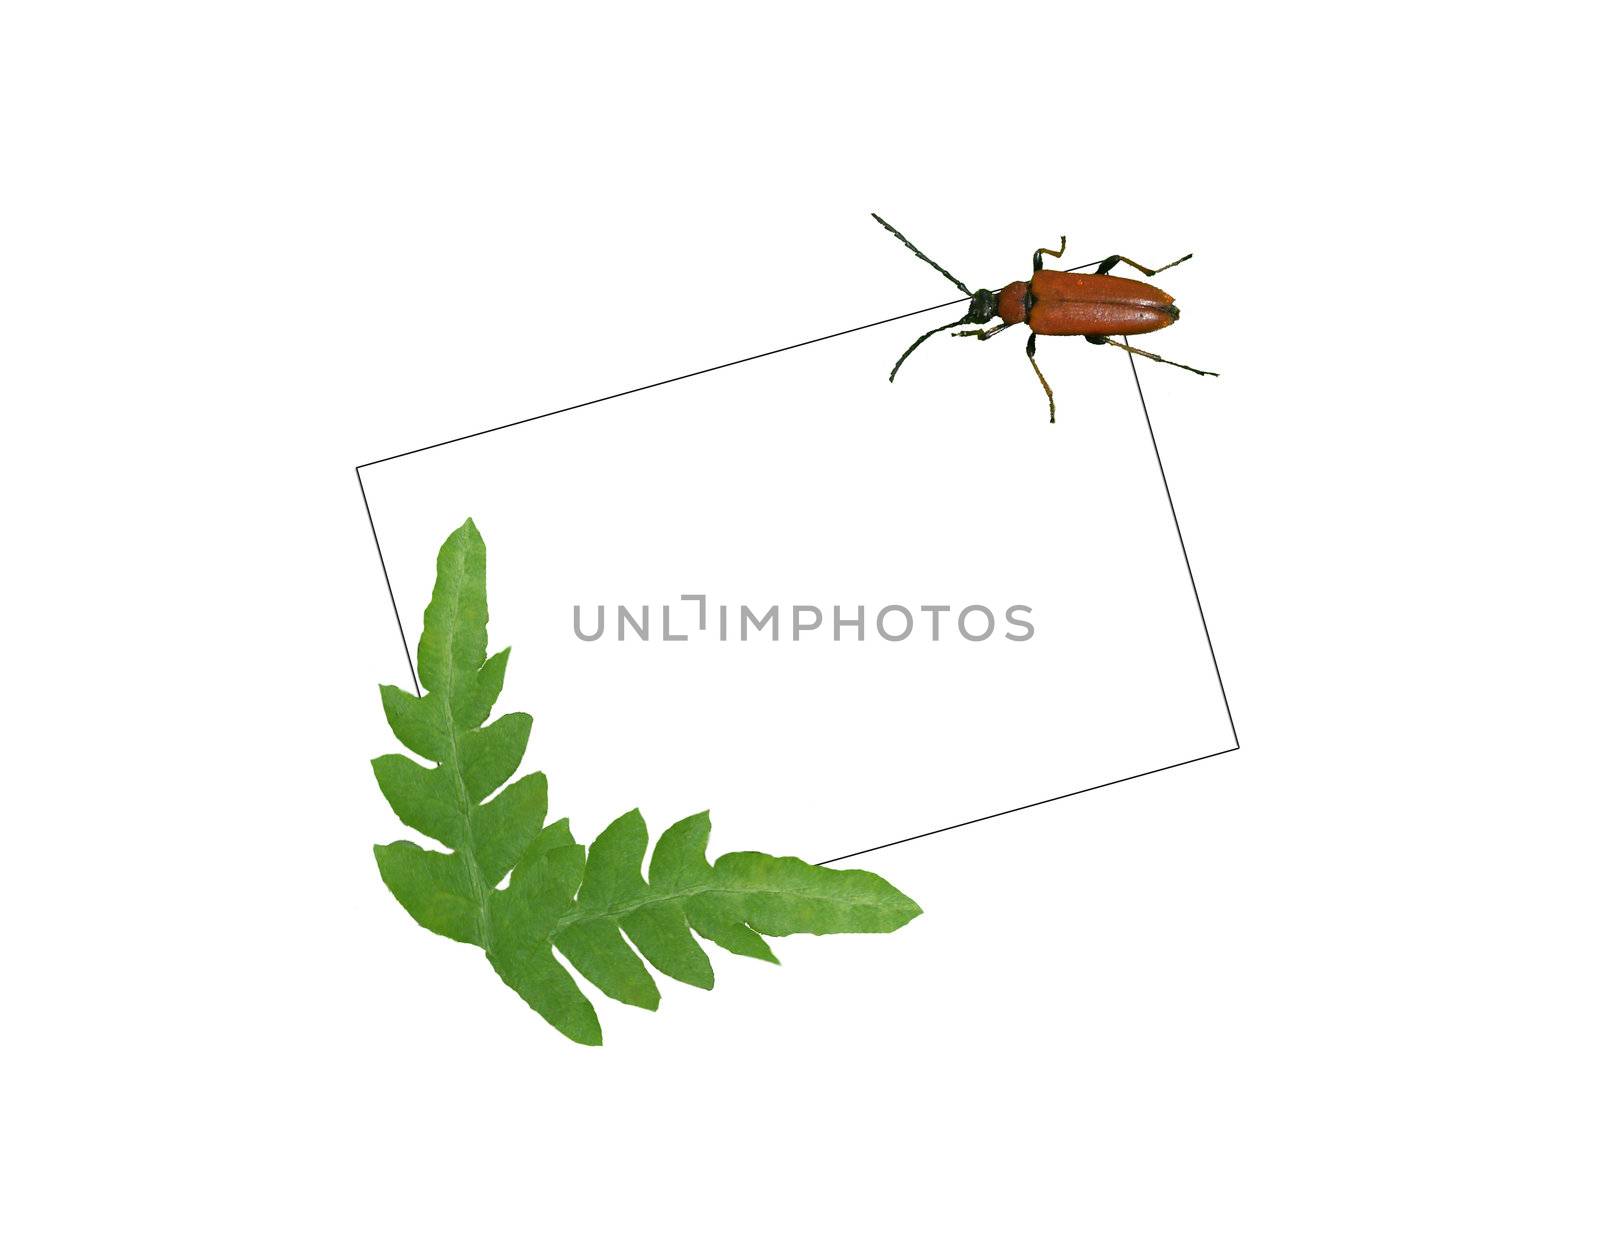 Framework and card with the image of the bug and fern